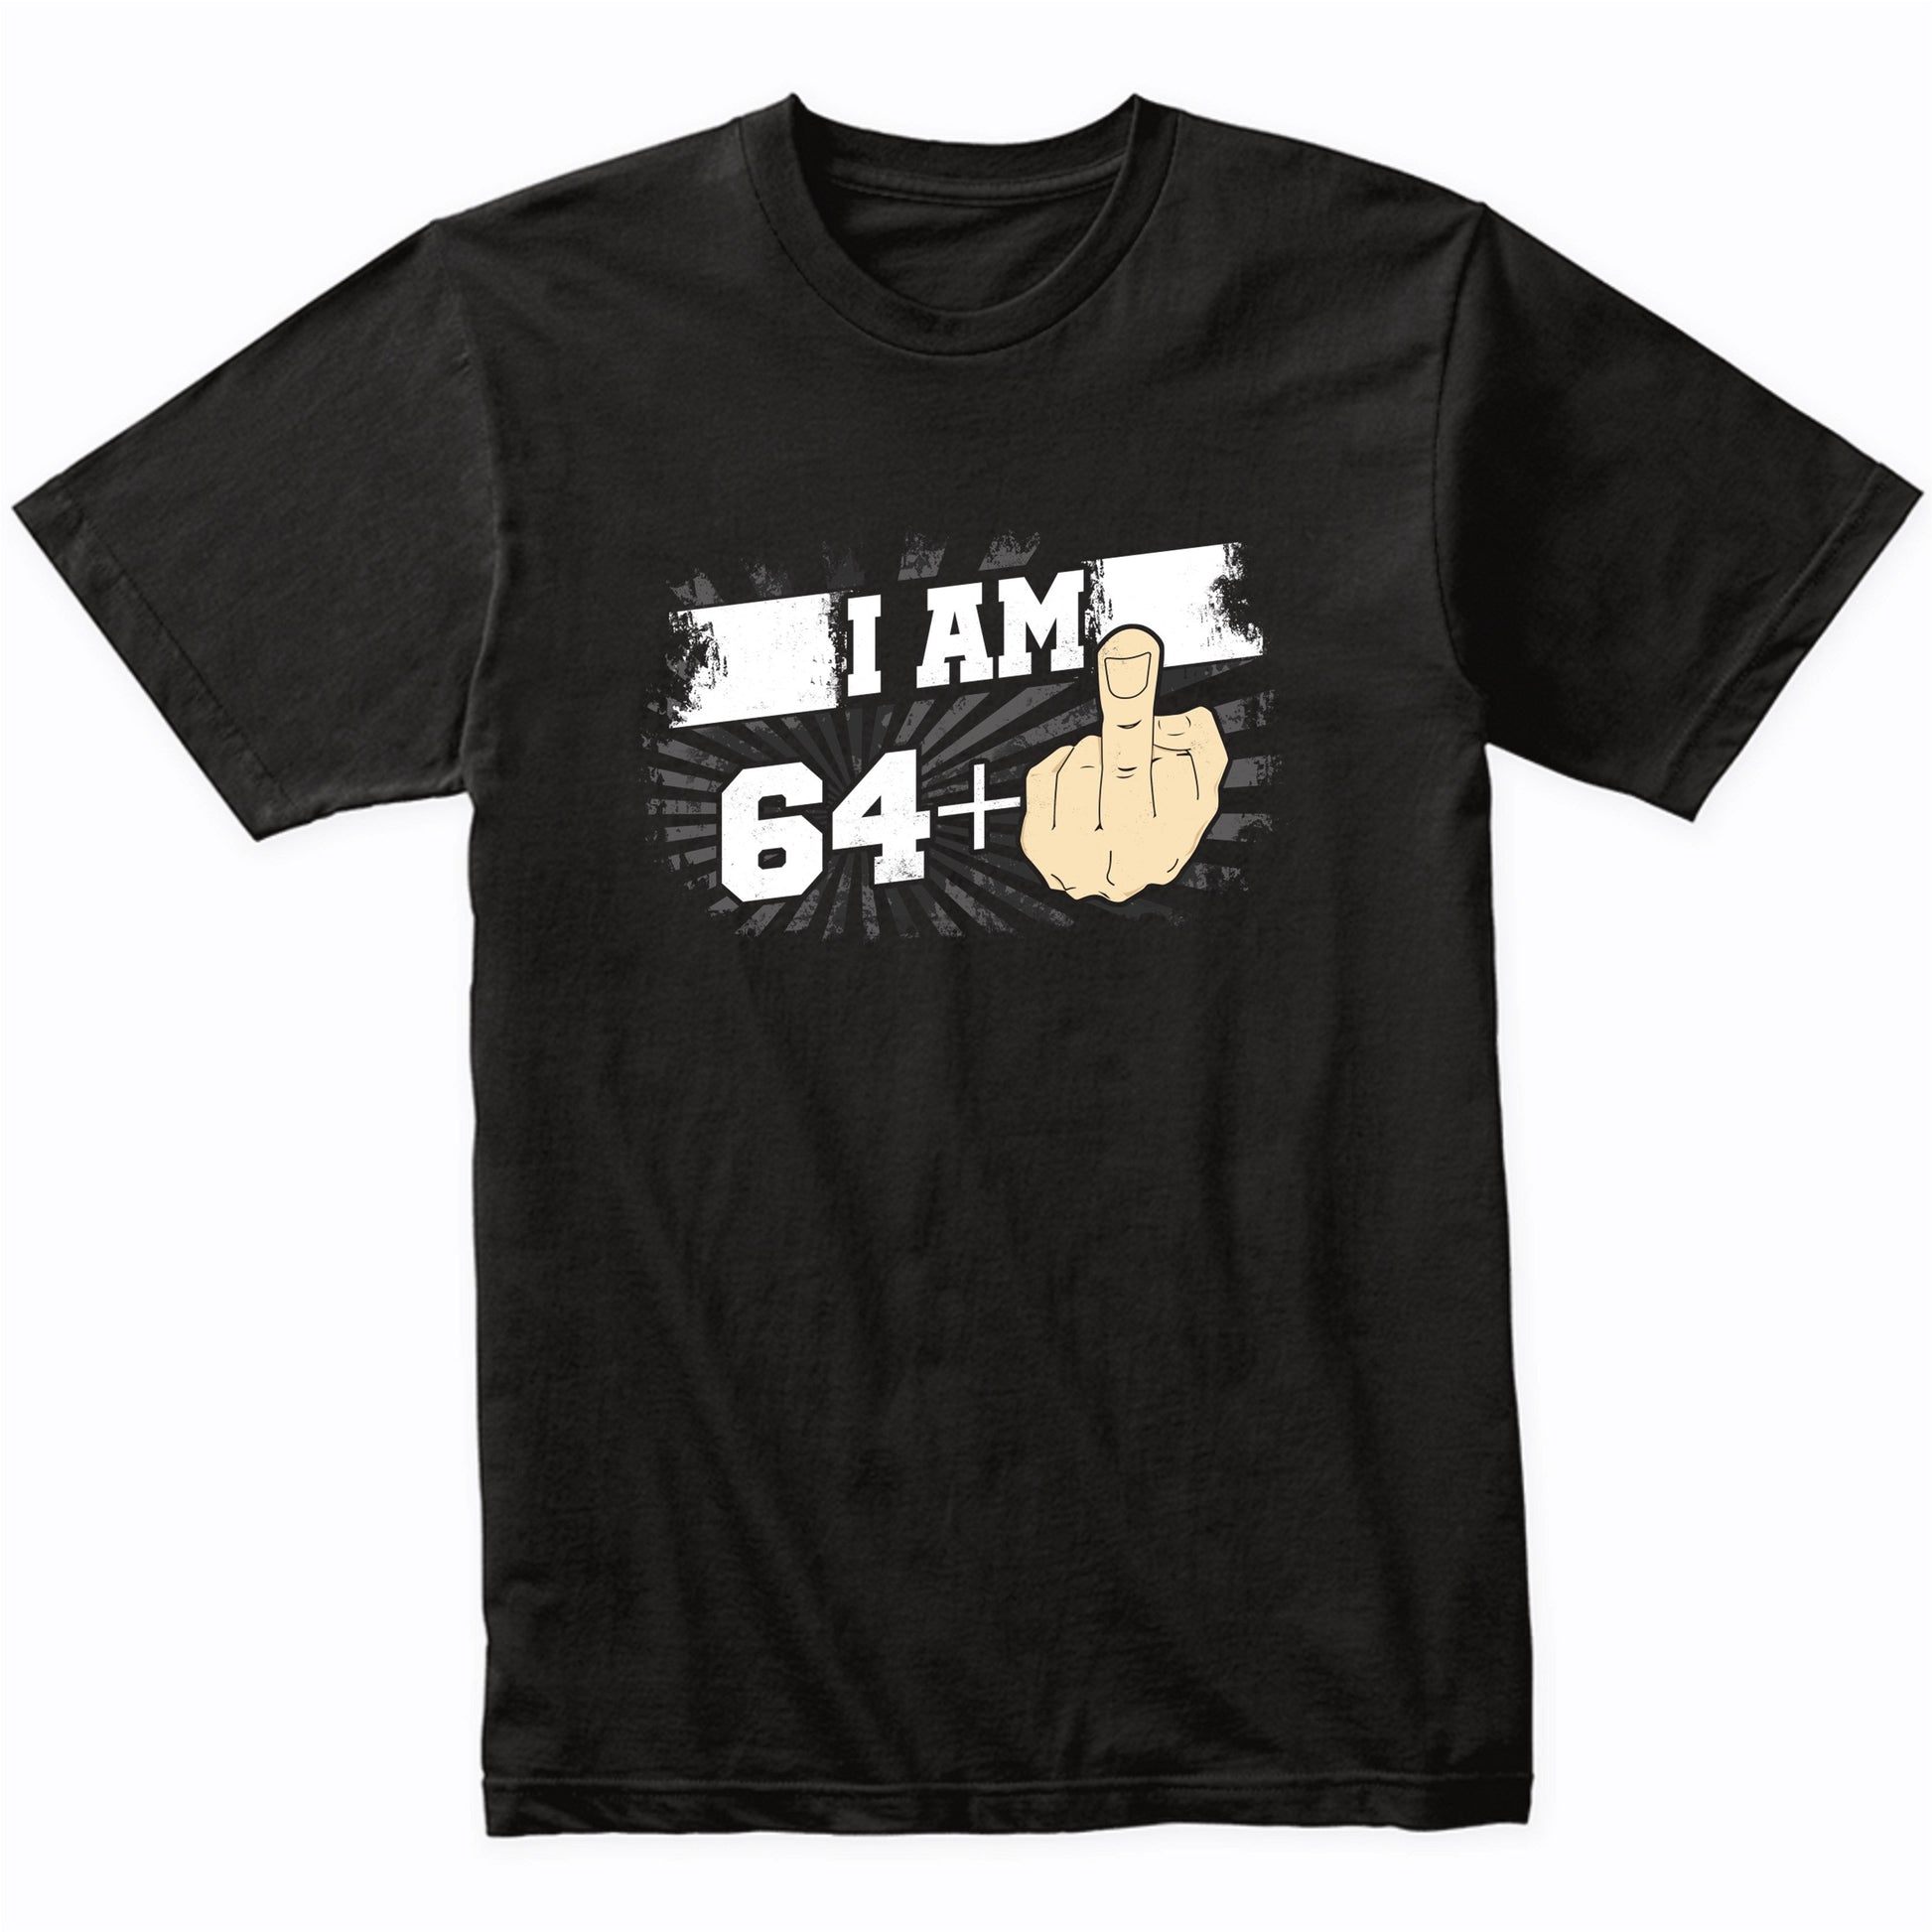 65th Birthday Shirt For Men - I Am 64 Plus Middle Finger 65 Years Old T-Shirt